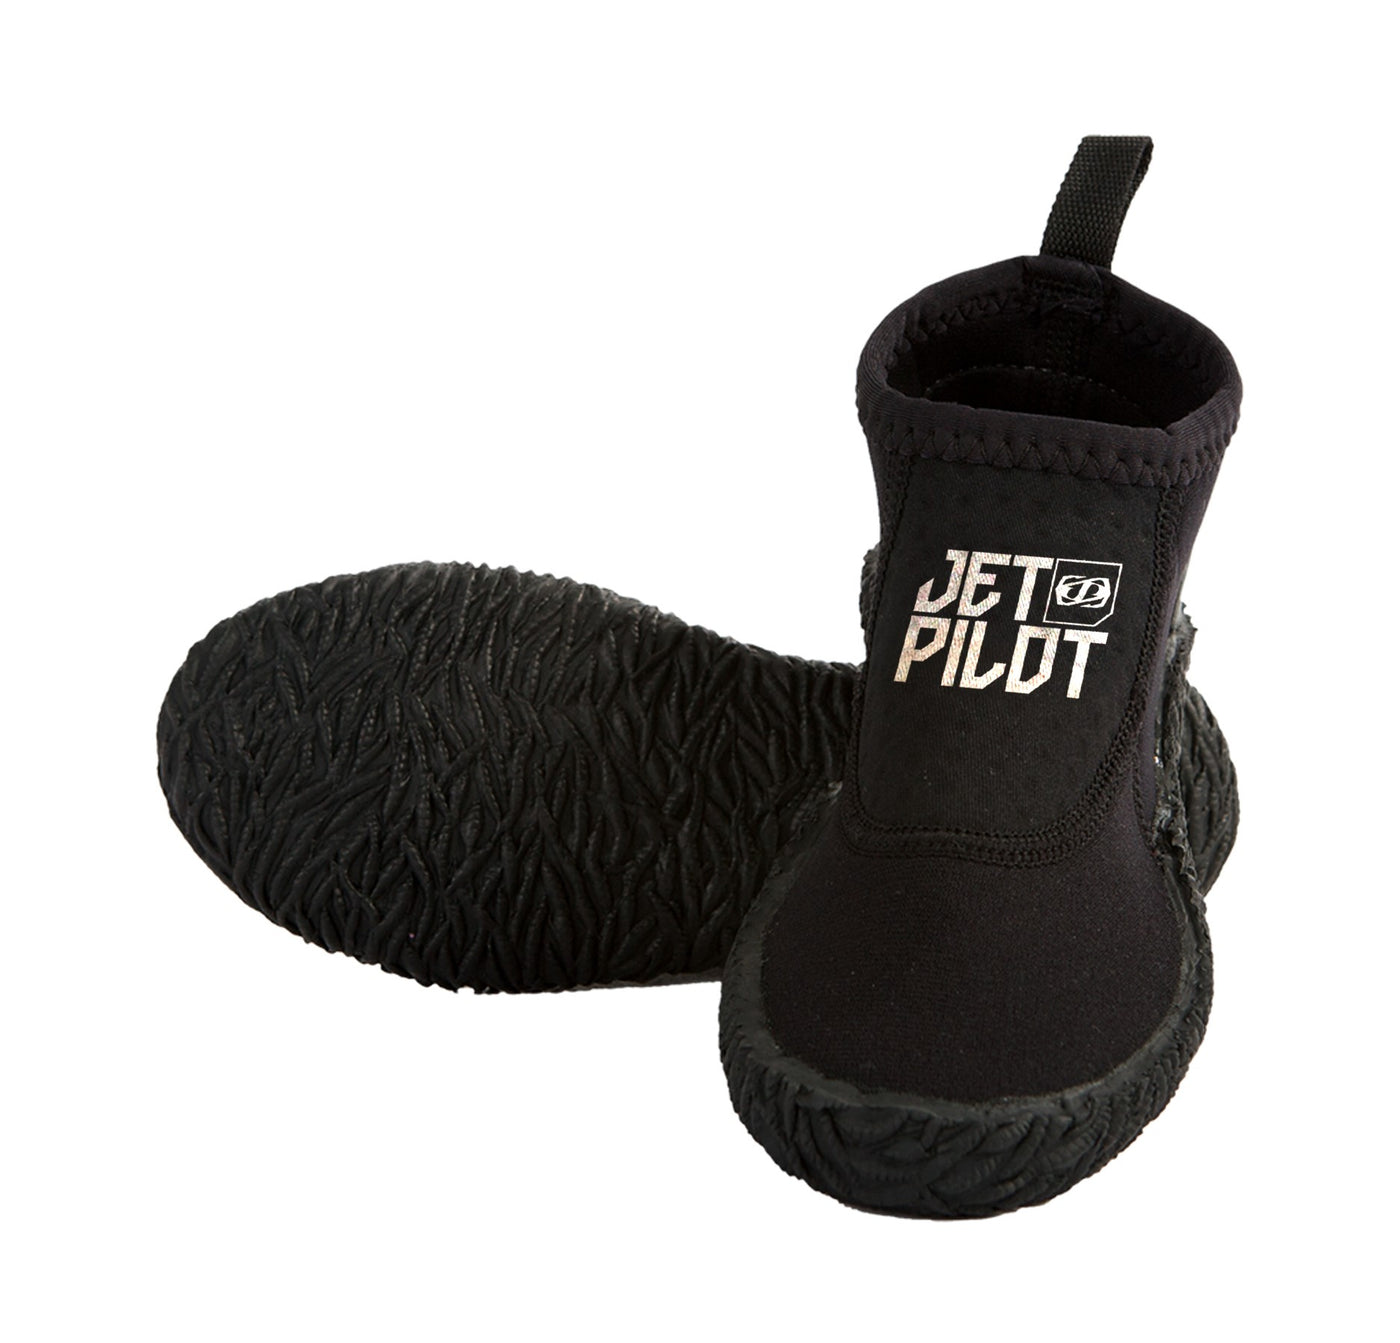 Front and bottom view of the Jetpilot Kid's Hydro Shoe.